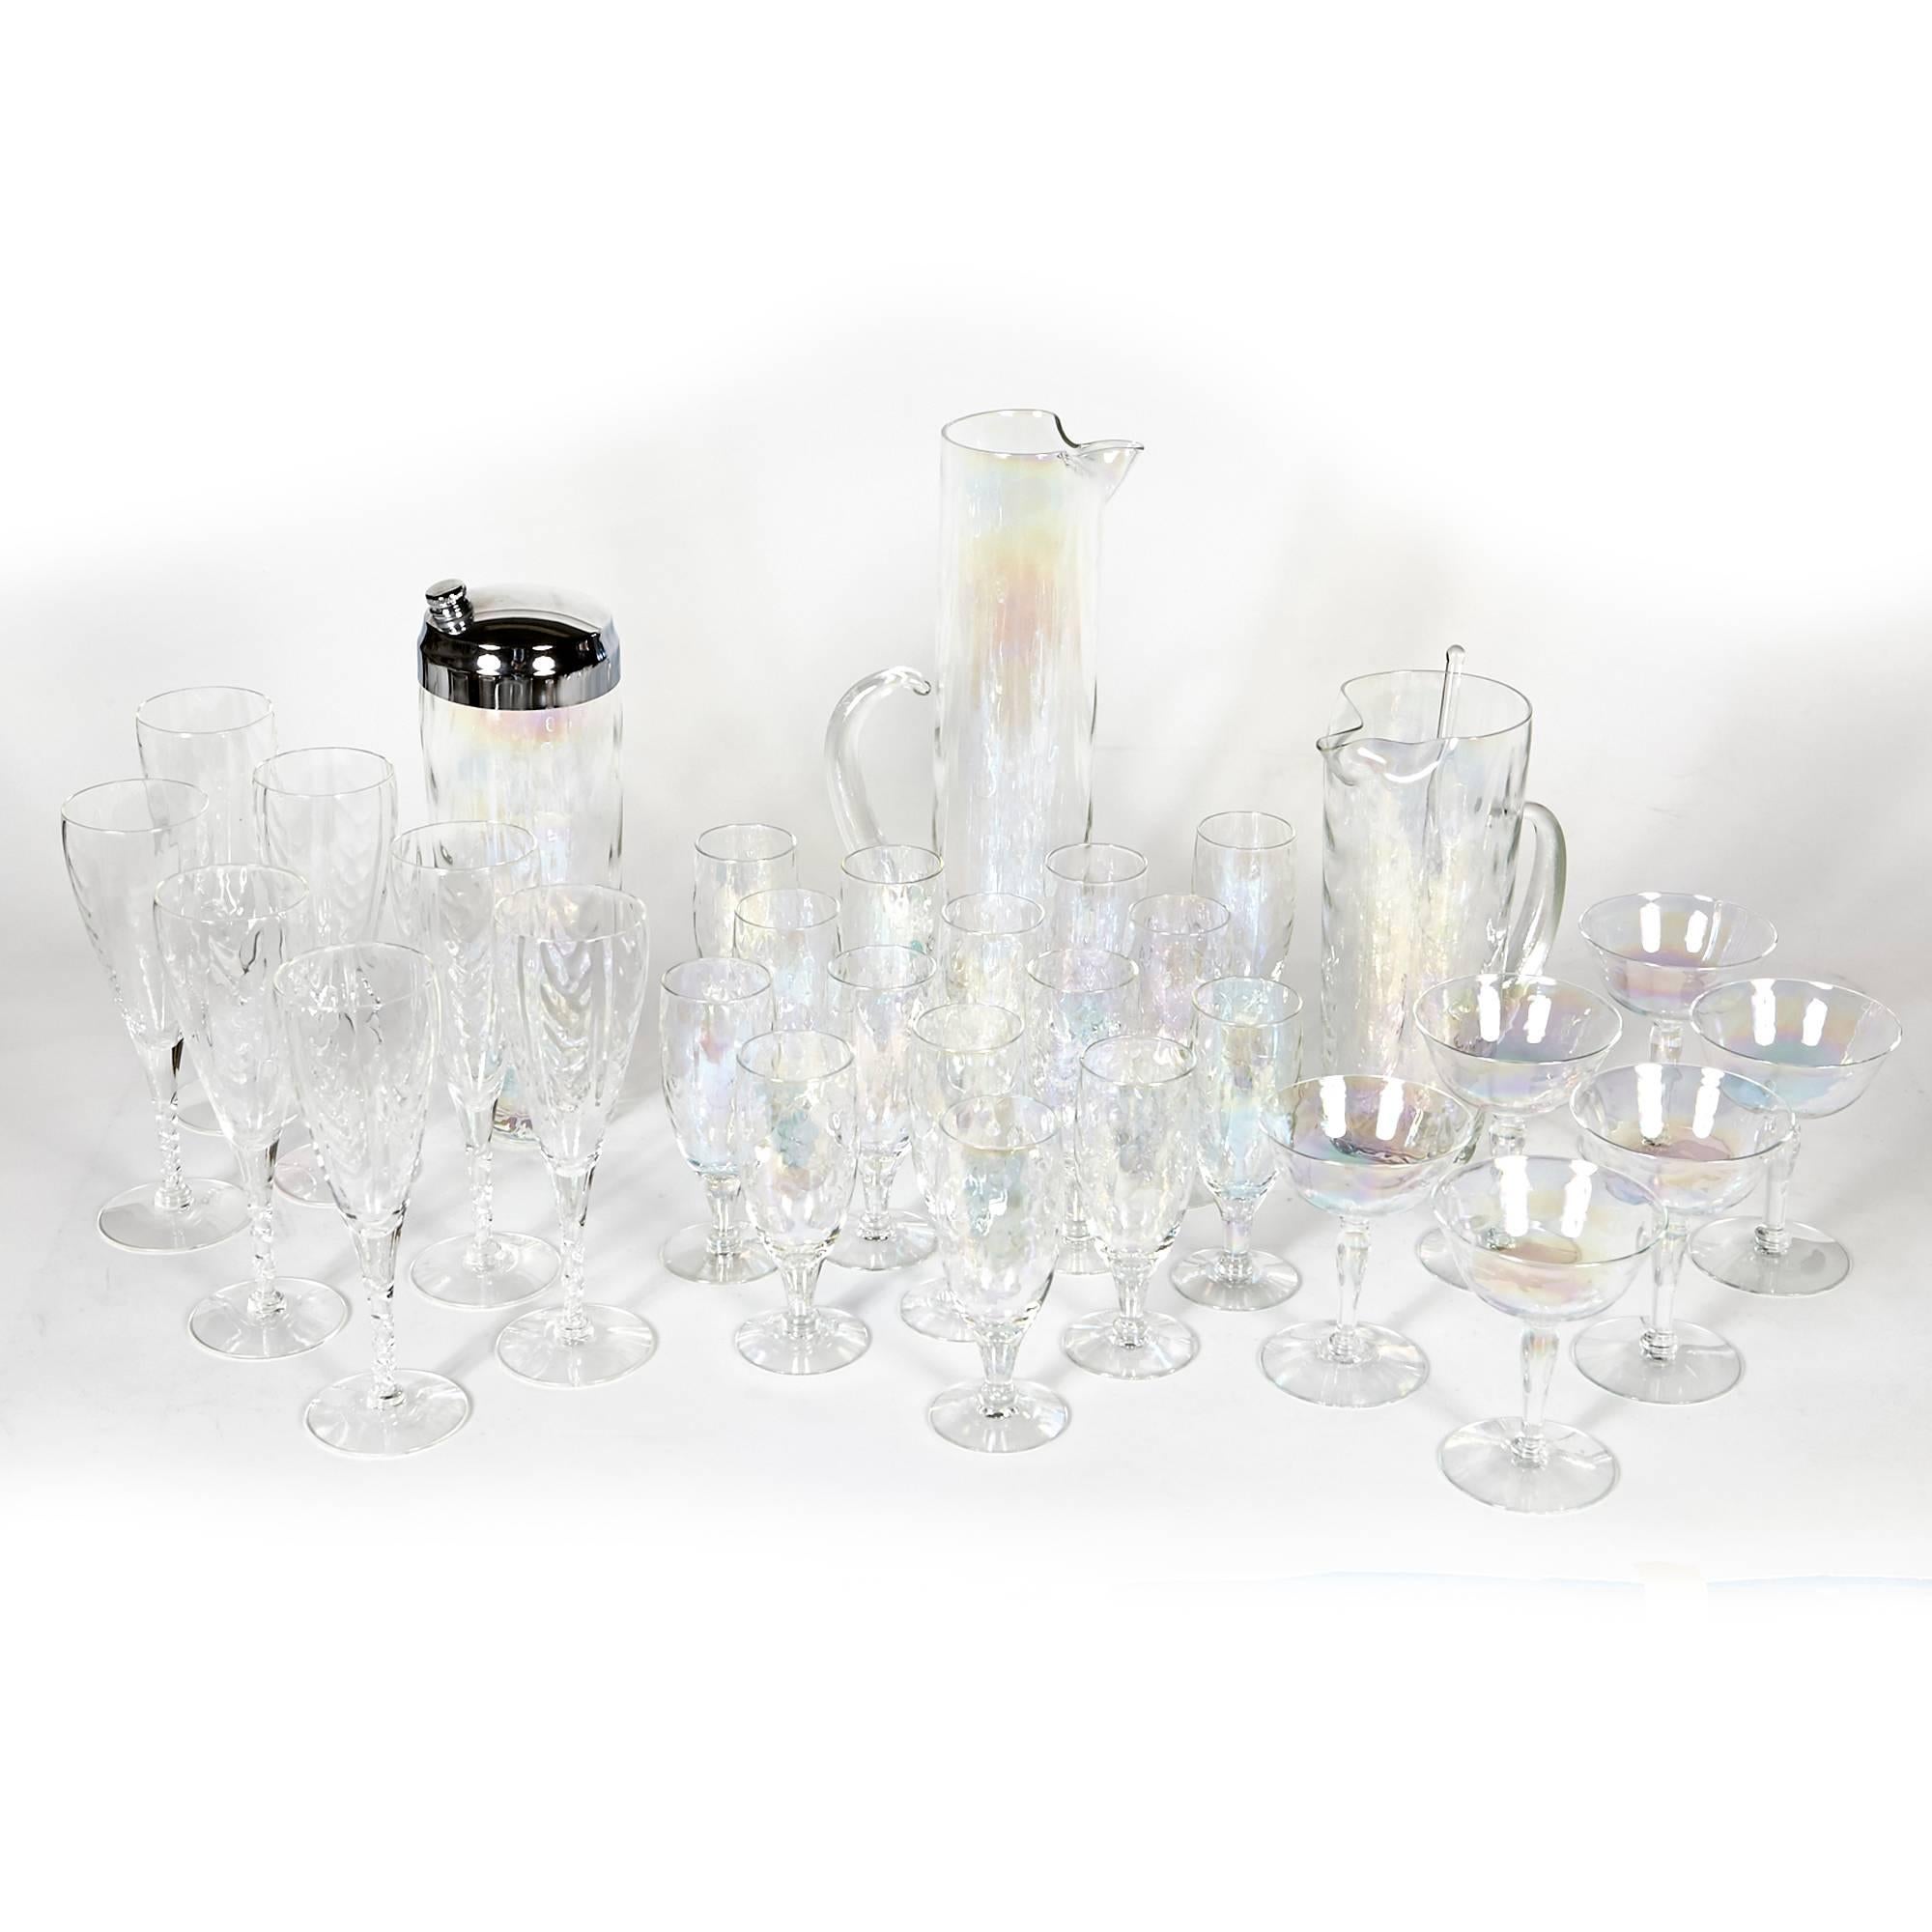 Vintage 1950s set of thirty-two vintage iridescent glass entertainment beverage set. The set measurements: tall handled pitcher 4